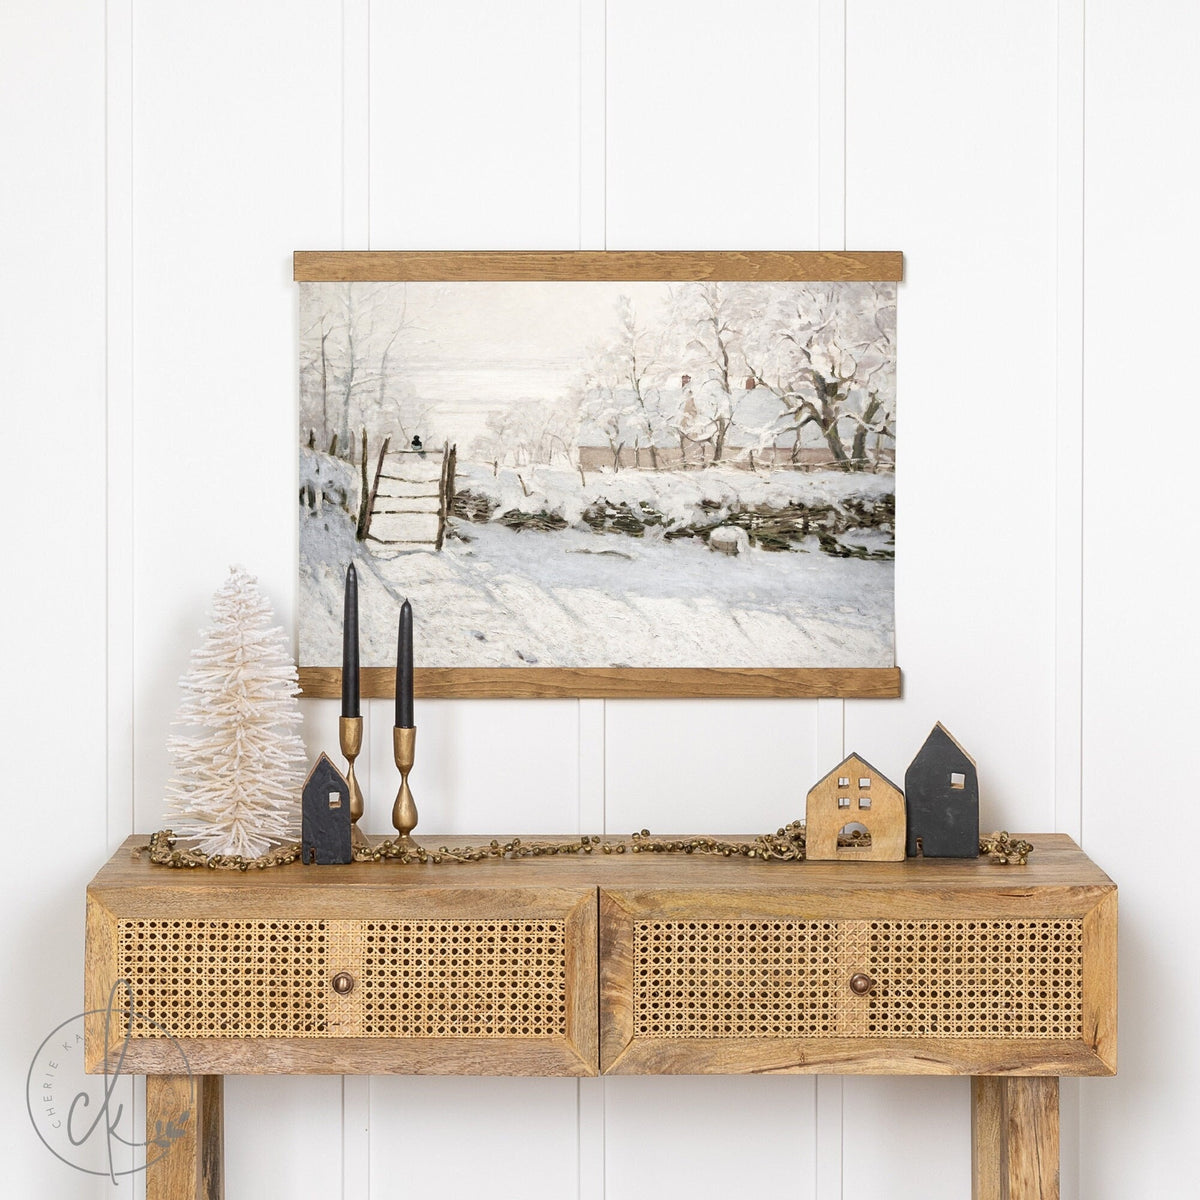 Winter Scene Painting | Canvas Tapestry | Snowy Landscape Art | Fabric Wall Hanging | Living Room Wall Decor | Winter Painting